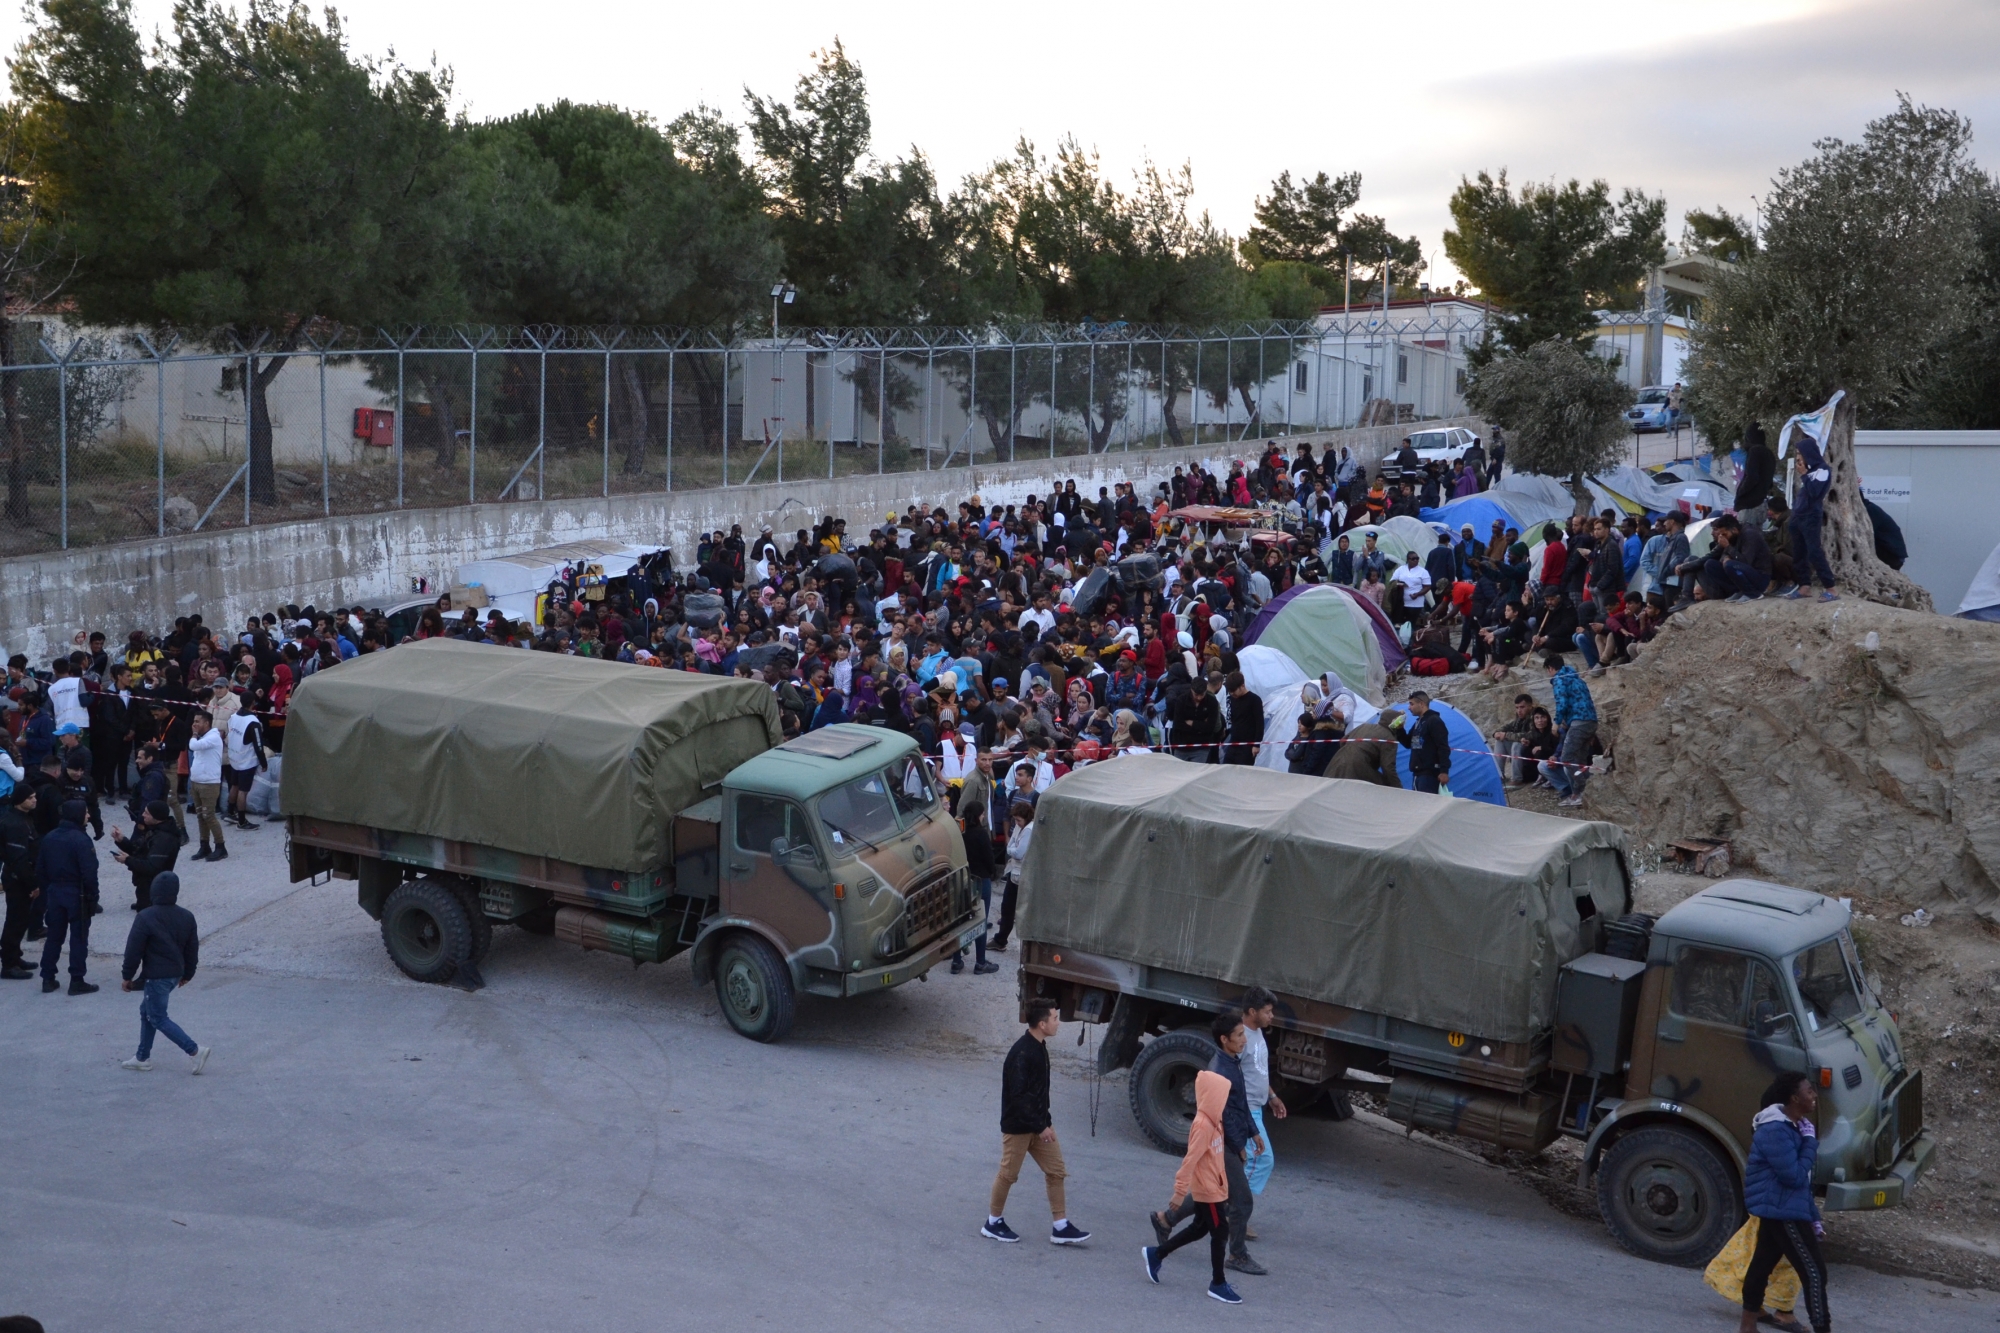 epa07965453 Refugees wait outside the hotspot in Moria, Lesvos island, Greece, 01 November 2019, to be transferred by navy ships to the mainland Greece. Over 1,000 asylum applicants will be transferred from NE Aegean islands to the mainland in the next three days. According to sources speaking to Athens-Macedonian News Agency, all refugees will be distributed evenly in the mainland Greece. Two navy ships carrying 800 individuals from Lesvos will arrive at Elefsina port on 02 November, while another 100 will be transferred from Samos to Piraeus port on 03 November and another 130 asylum applicants will arrive in Piraeus the next days from Chios, Kos and Leros islands.  EPA/STRATIS BALASKAS GREECE LESVOS ISLAND REFUGEES